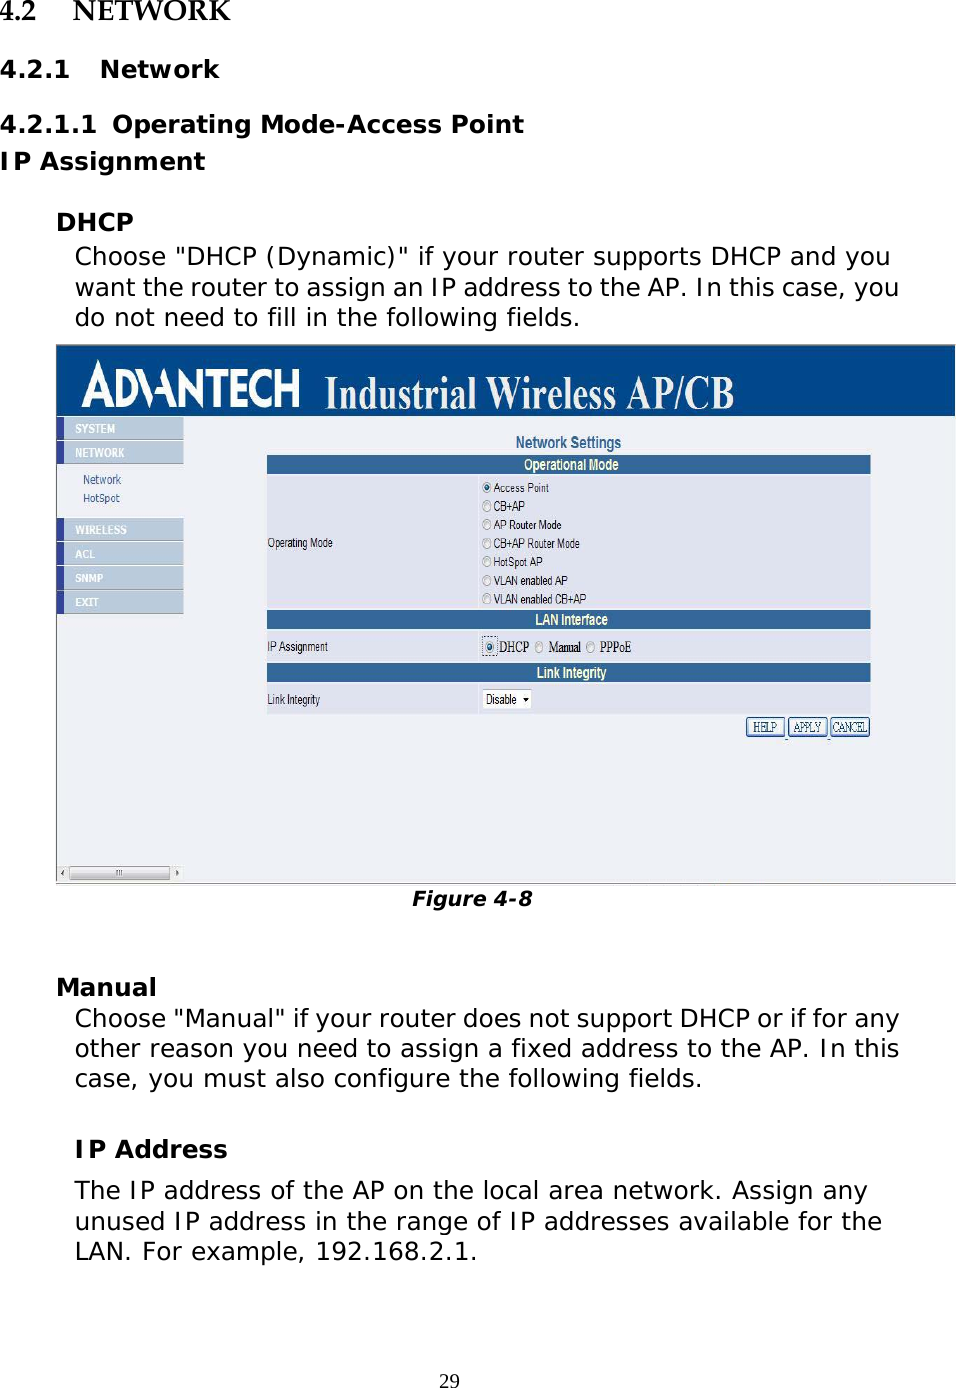                   4.2 NETWORK 4.2.1 Network 4.2.1.1  Operating Mode-Access Point IP Assignment   DHCP Choose &quot;DHCP (Dynamic)&quot; if your router supports DHCP and you want the router to assign an IP address to the AP. In this case, you do not need to fill in the following fields.   Figure 4-8   Manual Choose &quot;Manual&quot; if your router does not support DHCP or if for any other reason you need to assign a fixed address to the AP. In this case, you must also configure the following fields.  IP Address  The IP address of the AP on the local area network. Assign any unused IP address in the range of IP addresses available for the LAN. For example, 192.168.2.1.   29 